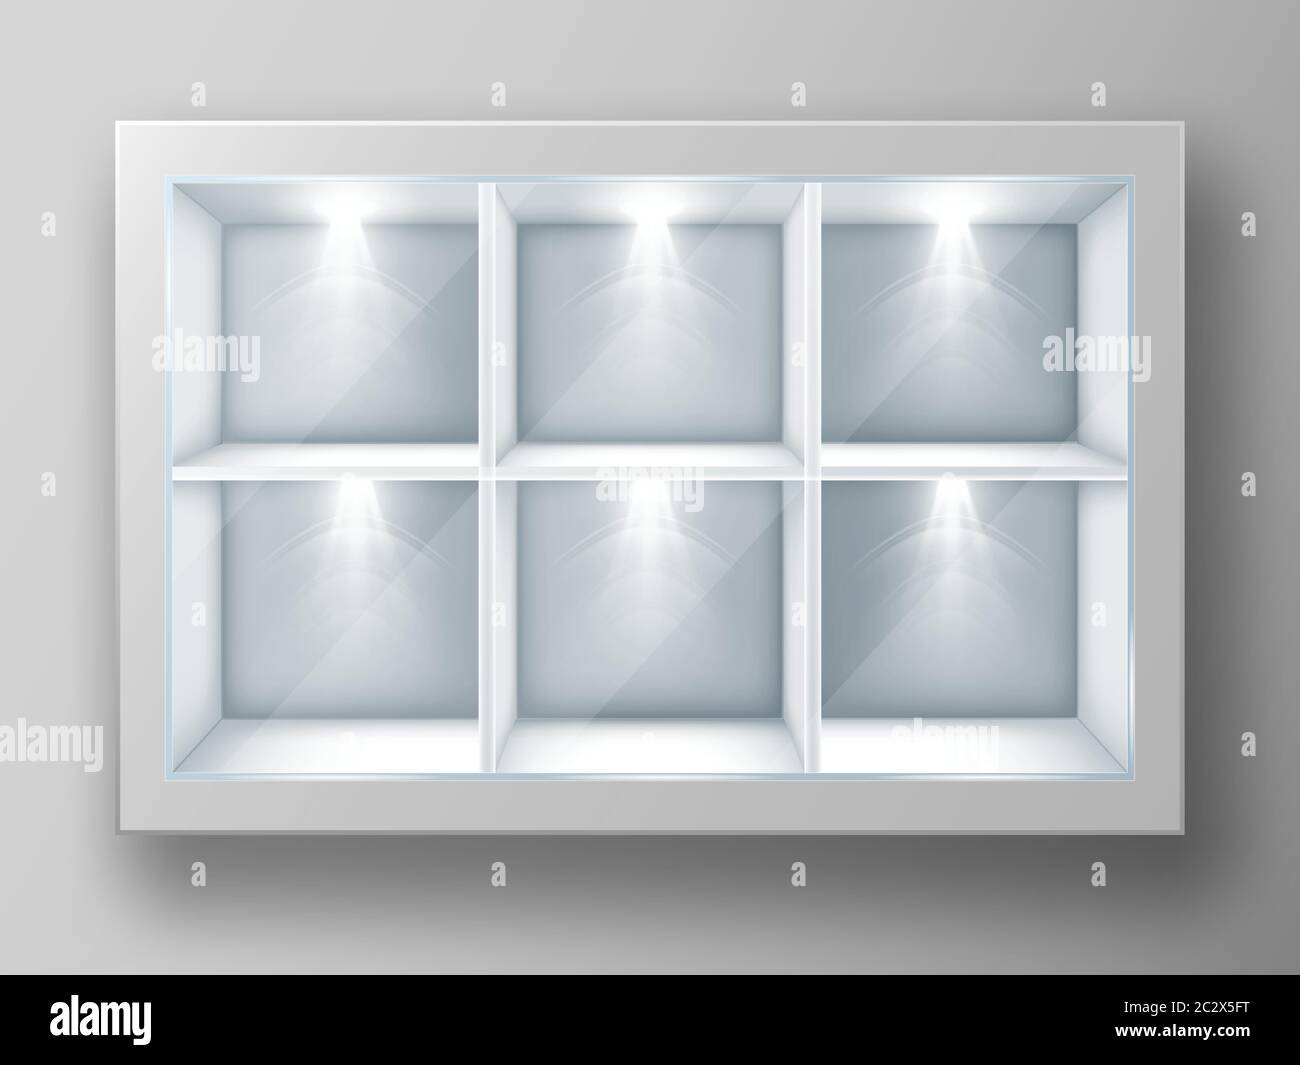 White showcase with square shelves in shop or gallery. Vector realistic mockup of empty glass display stand or bookshelf illuminated by spotlights for Stock Vector